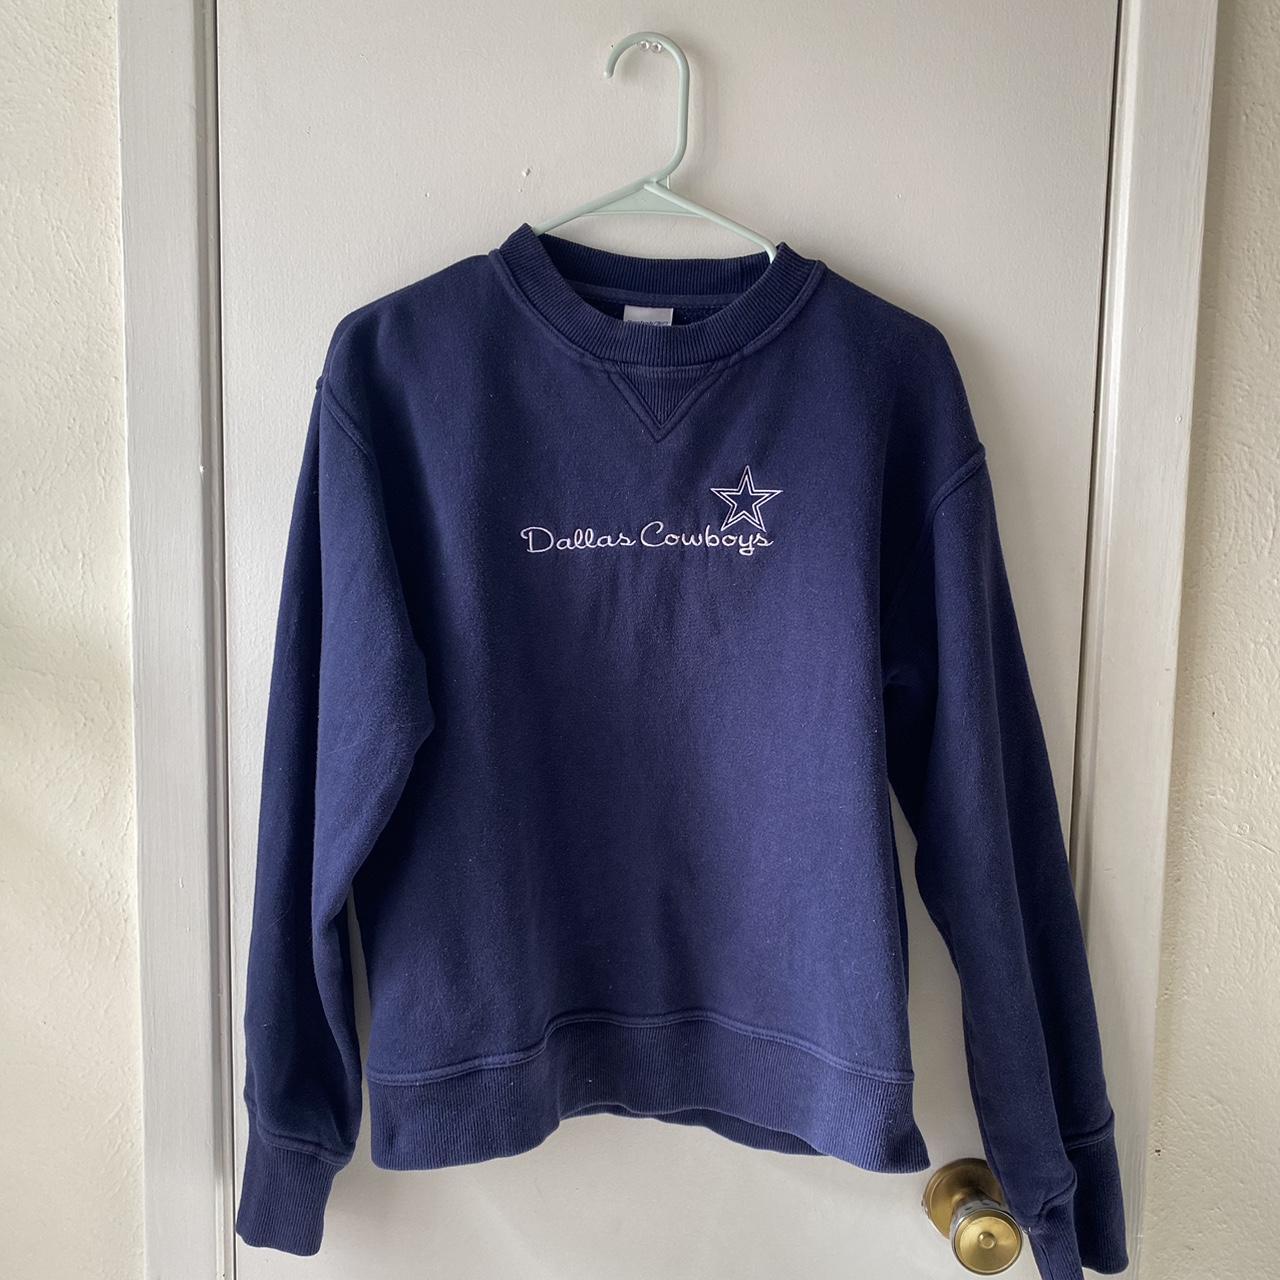 Dallas Cowboys crew neck sweater marked a size L but - Depop